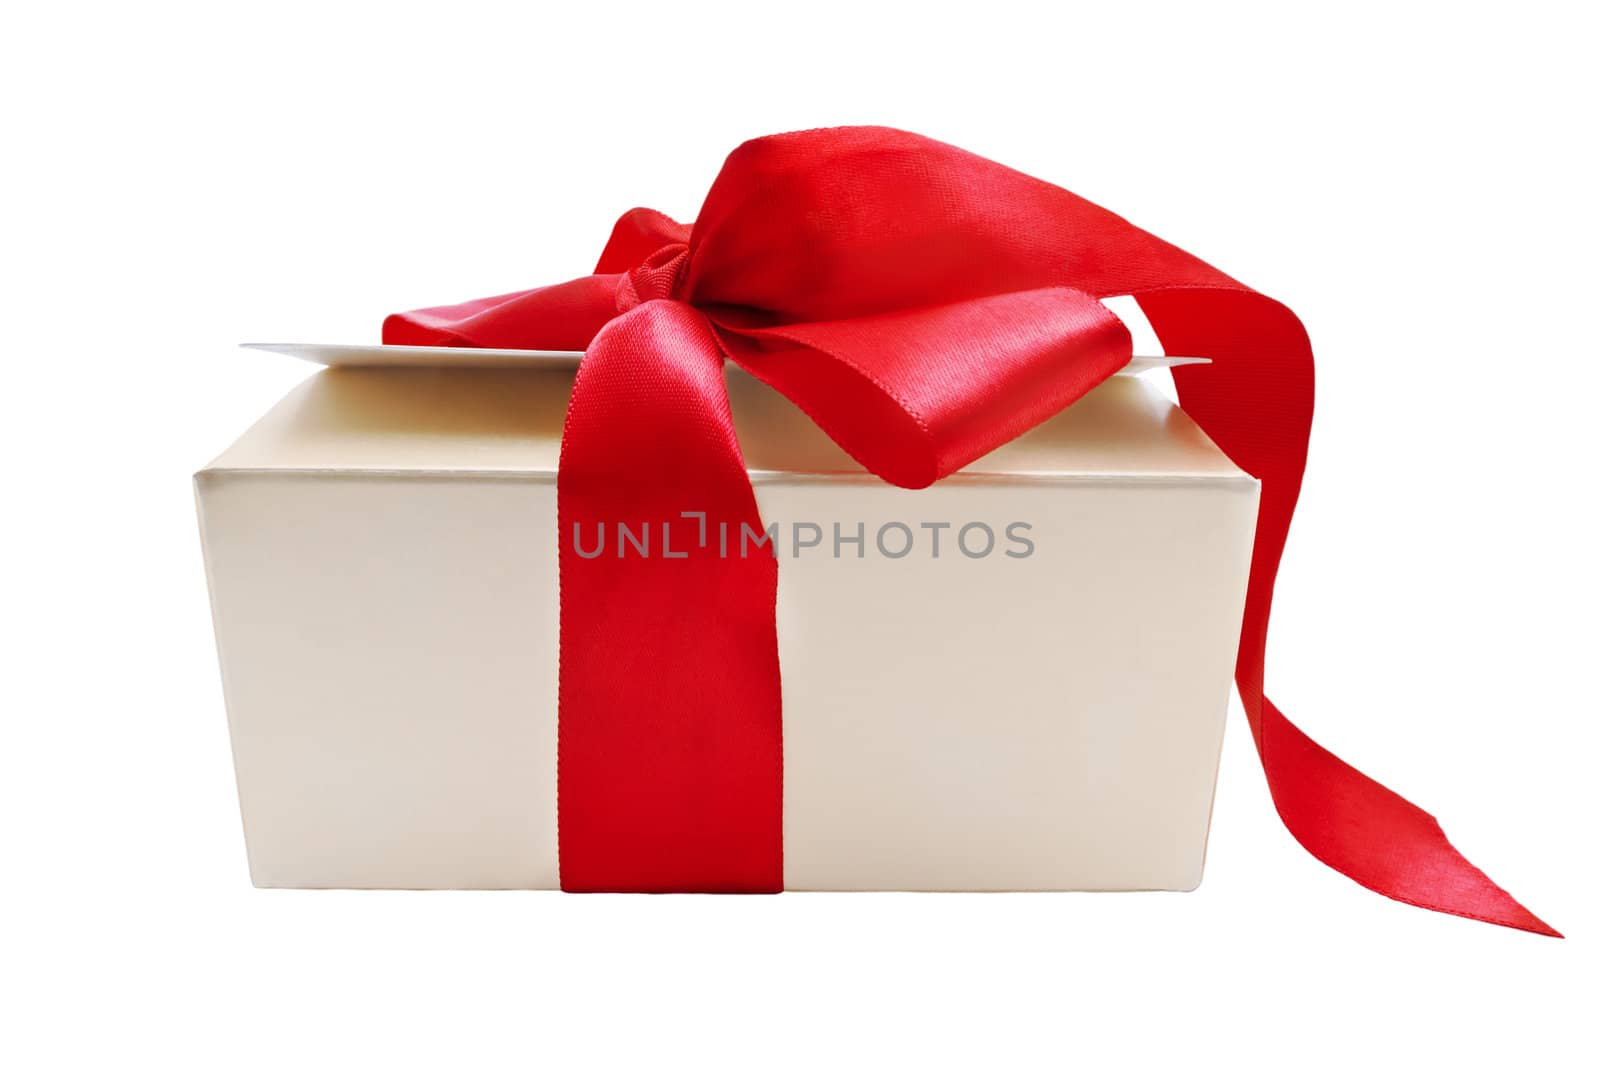 Isolated Gift Box on White by frannyanne